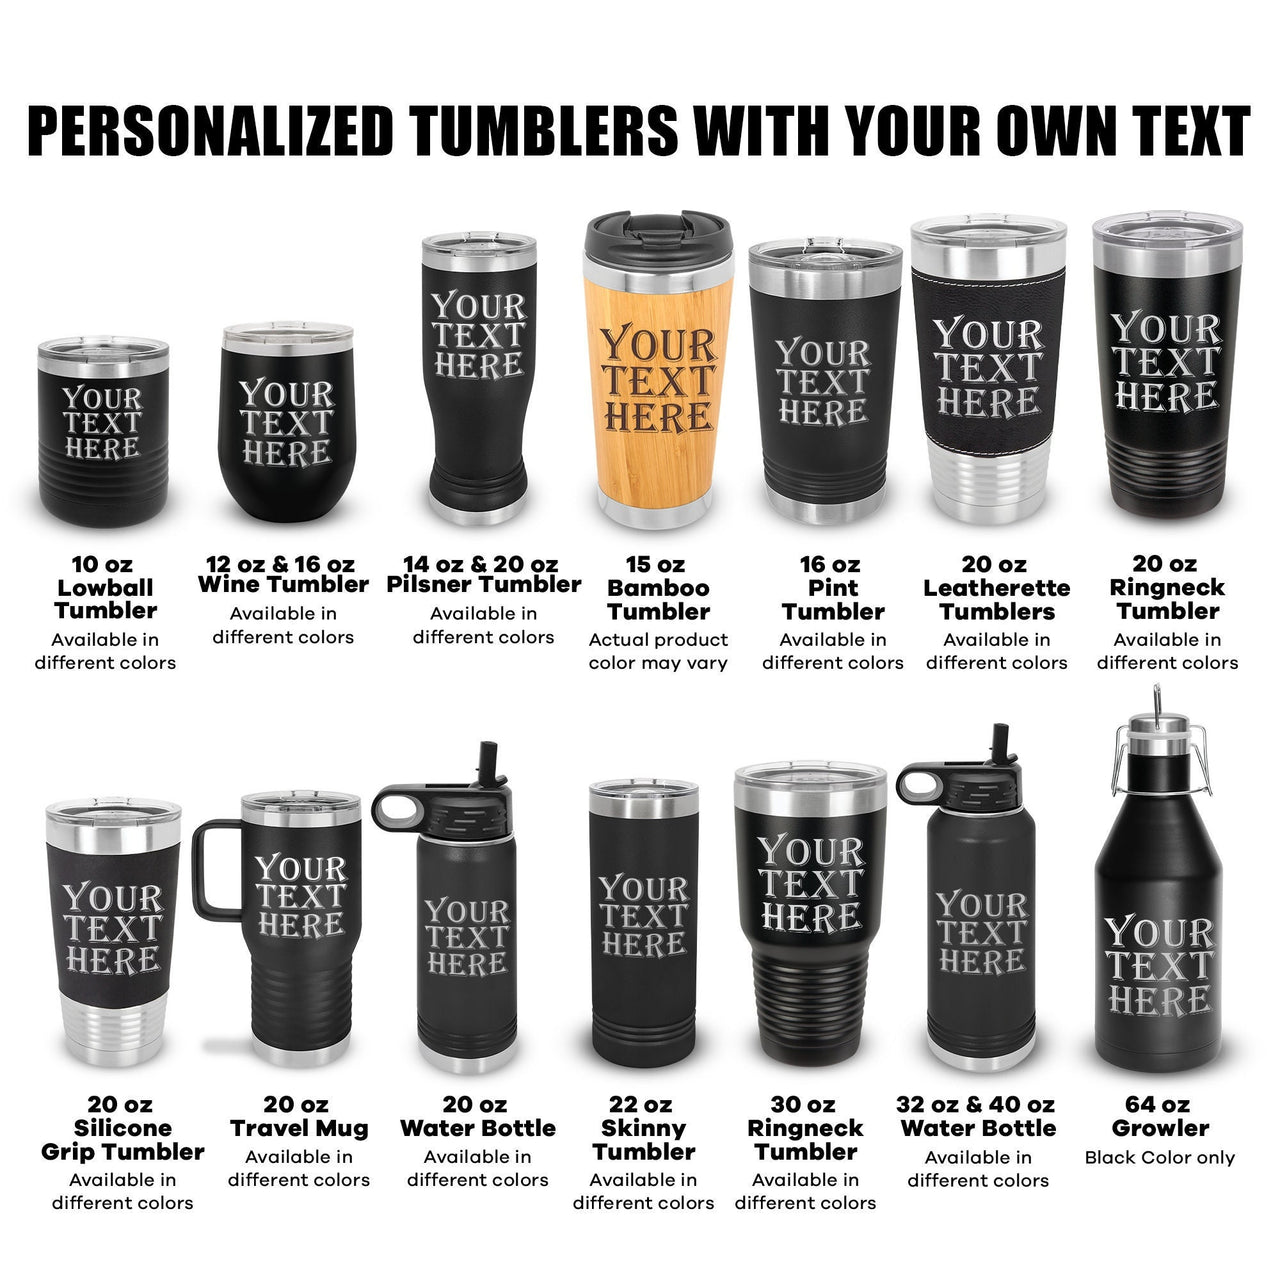 Personalized Insulated Tumblers 20 Oz. Several Colors Available 